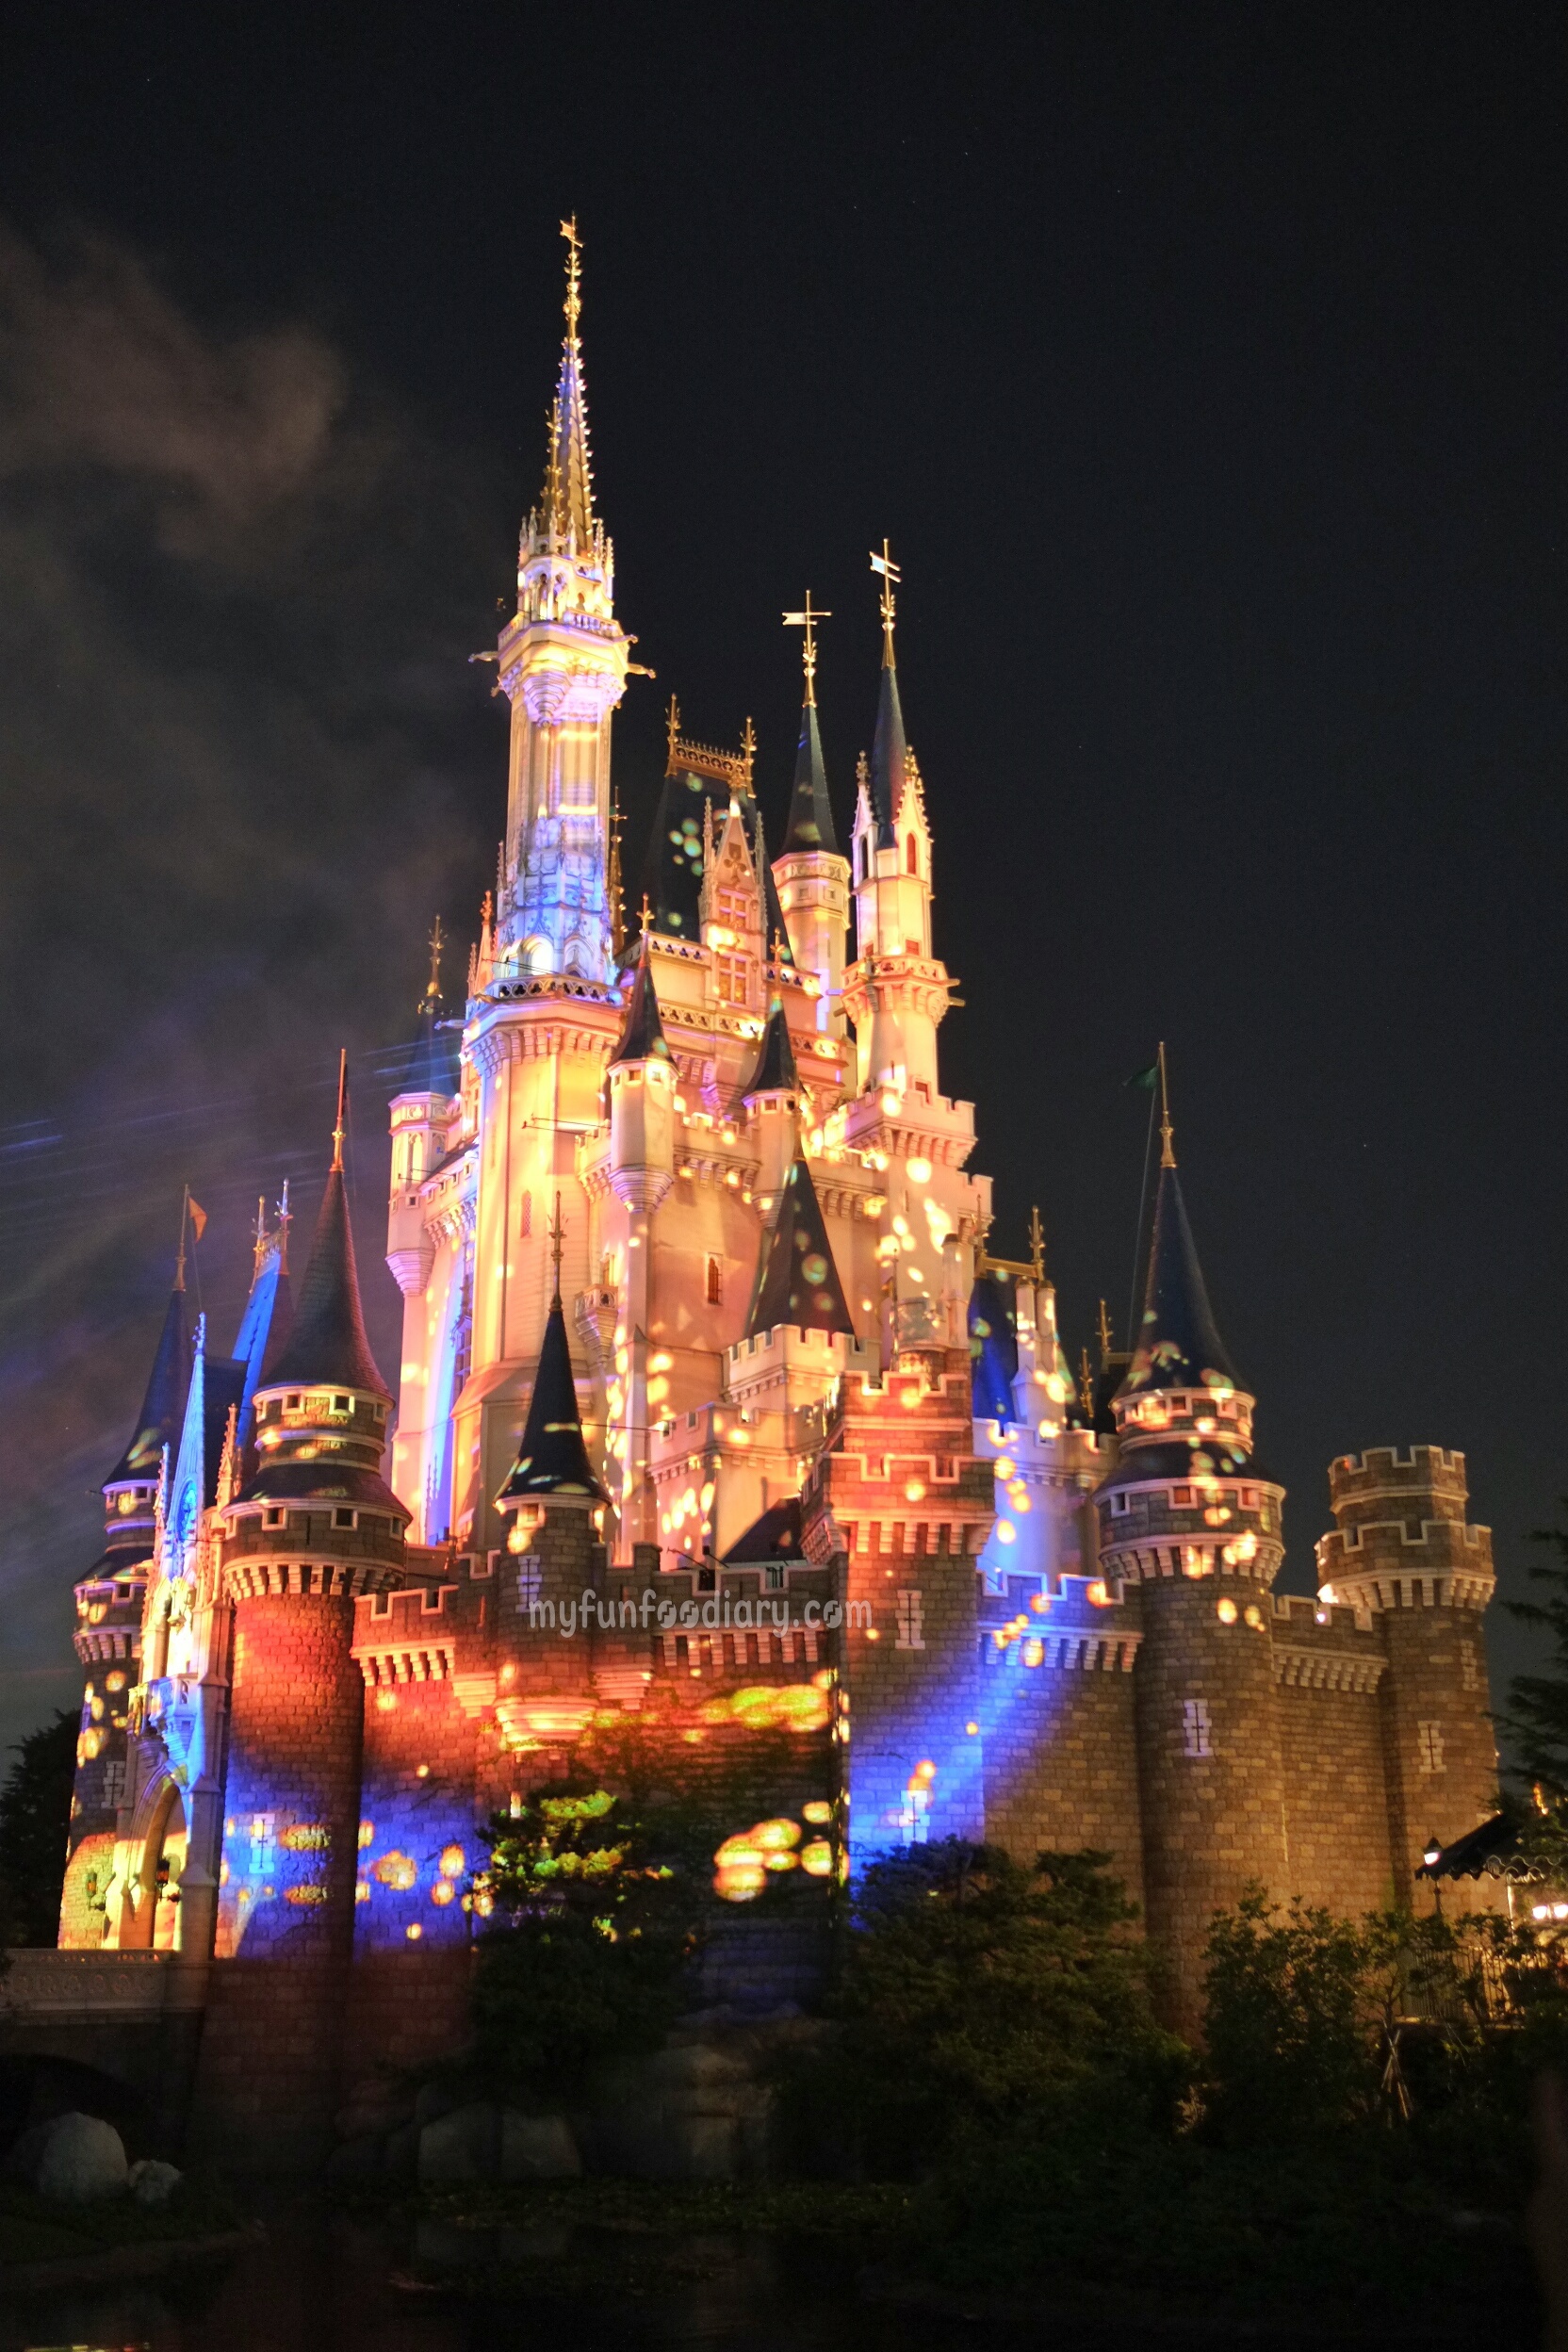 3D Mapping on Cinderella Castle at Tokyo Disneyland by Myfunfoodiary 03